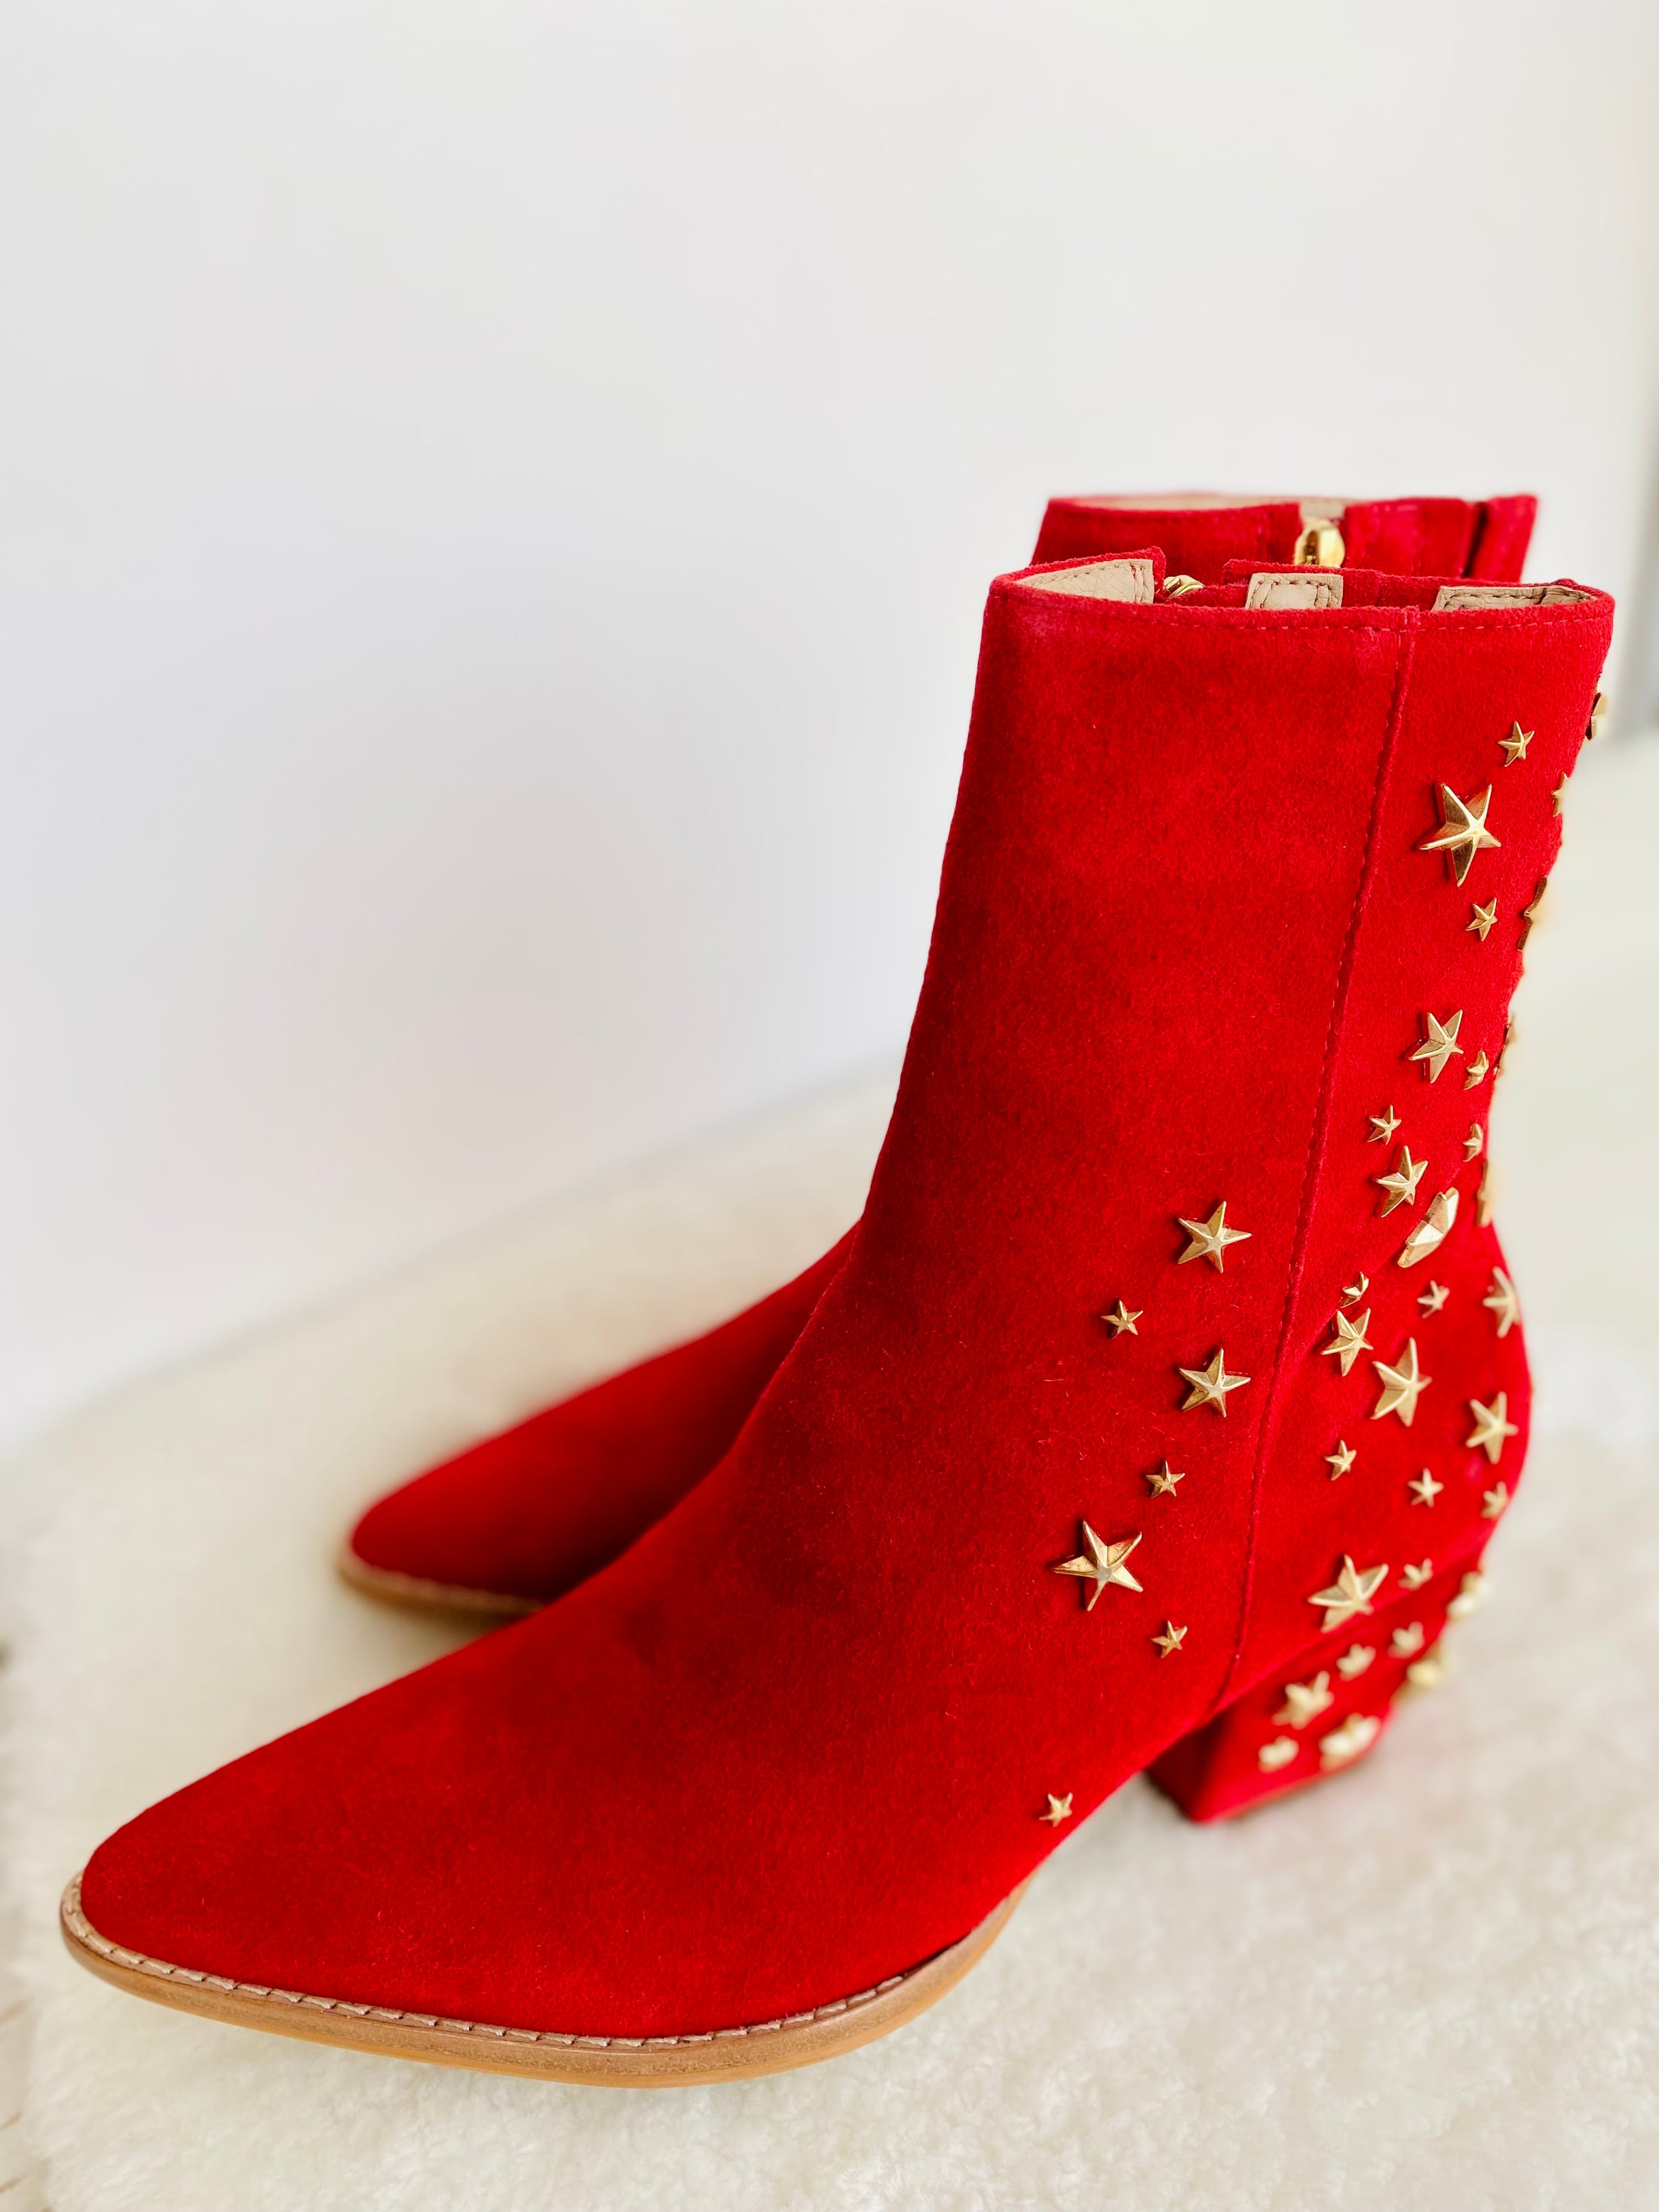 Red boots with red stars, Whimsy Whoo Boutique Red Boots, beautiful red boots